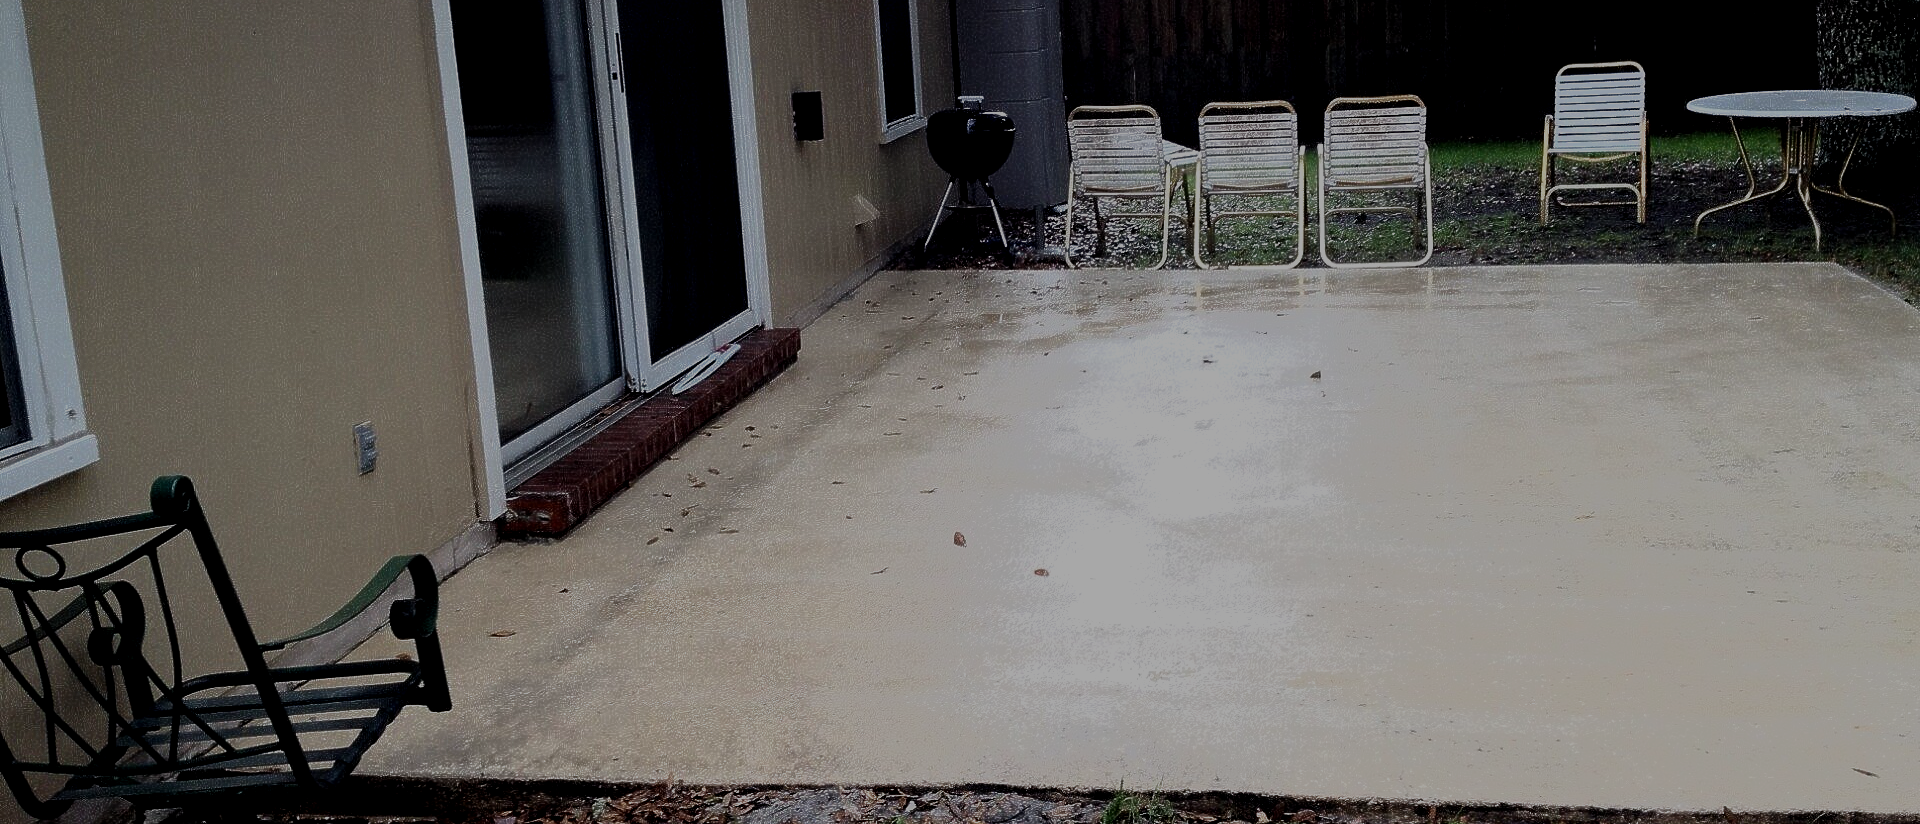 Stewart Pressure Cleaning After patio cleaning